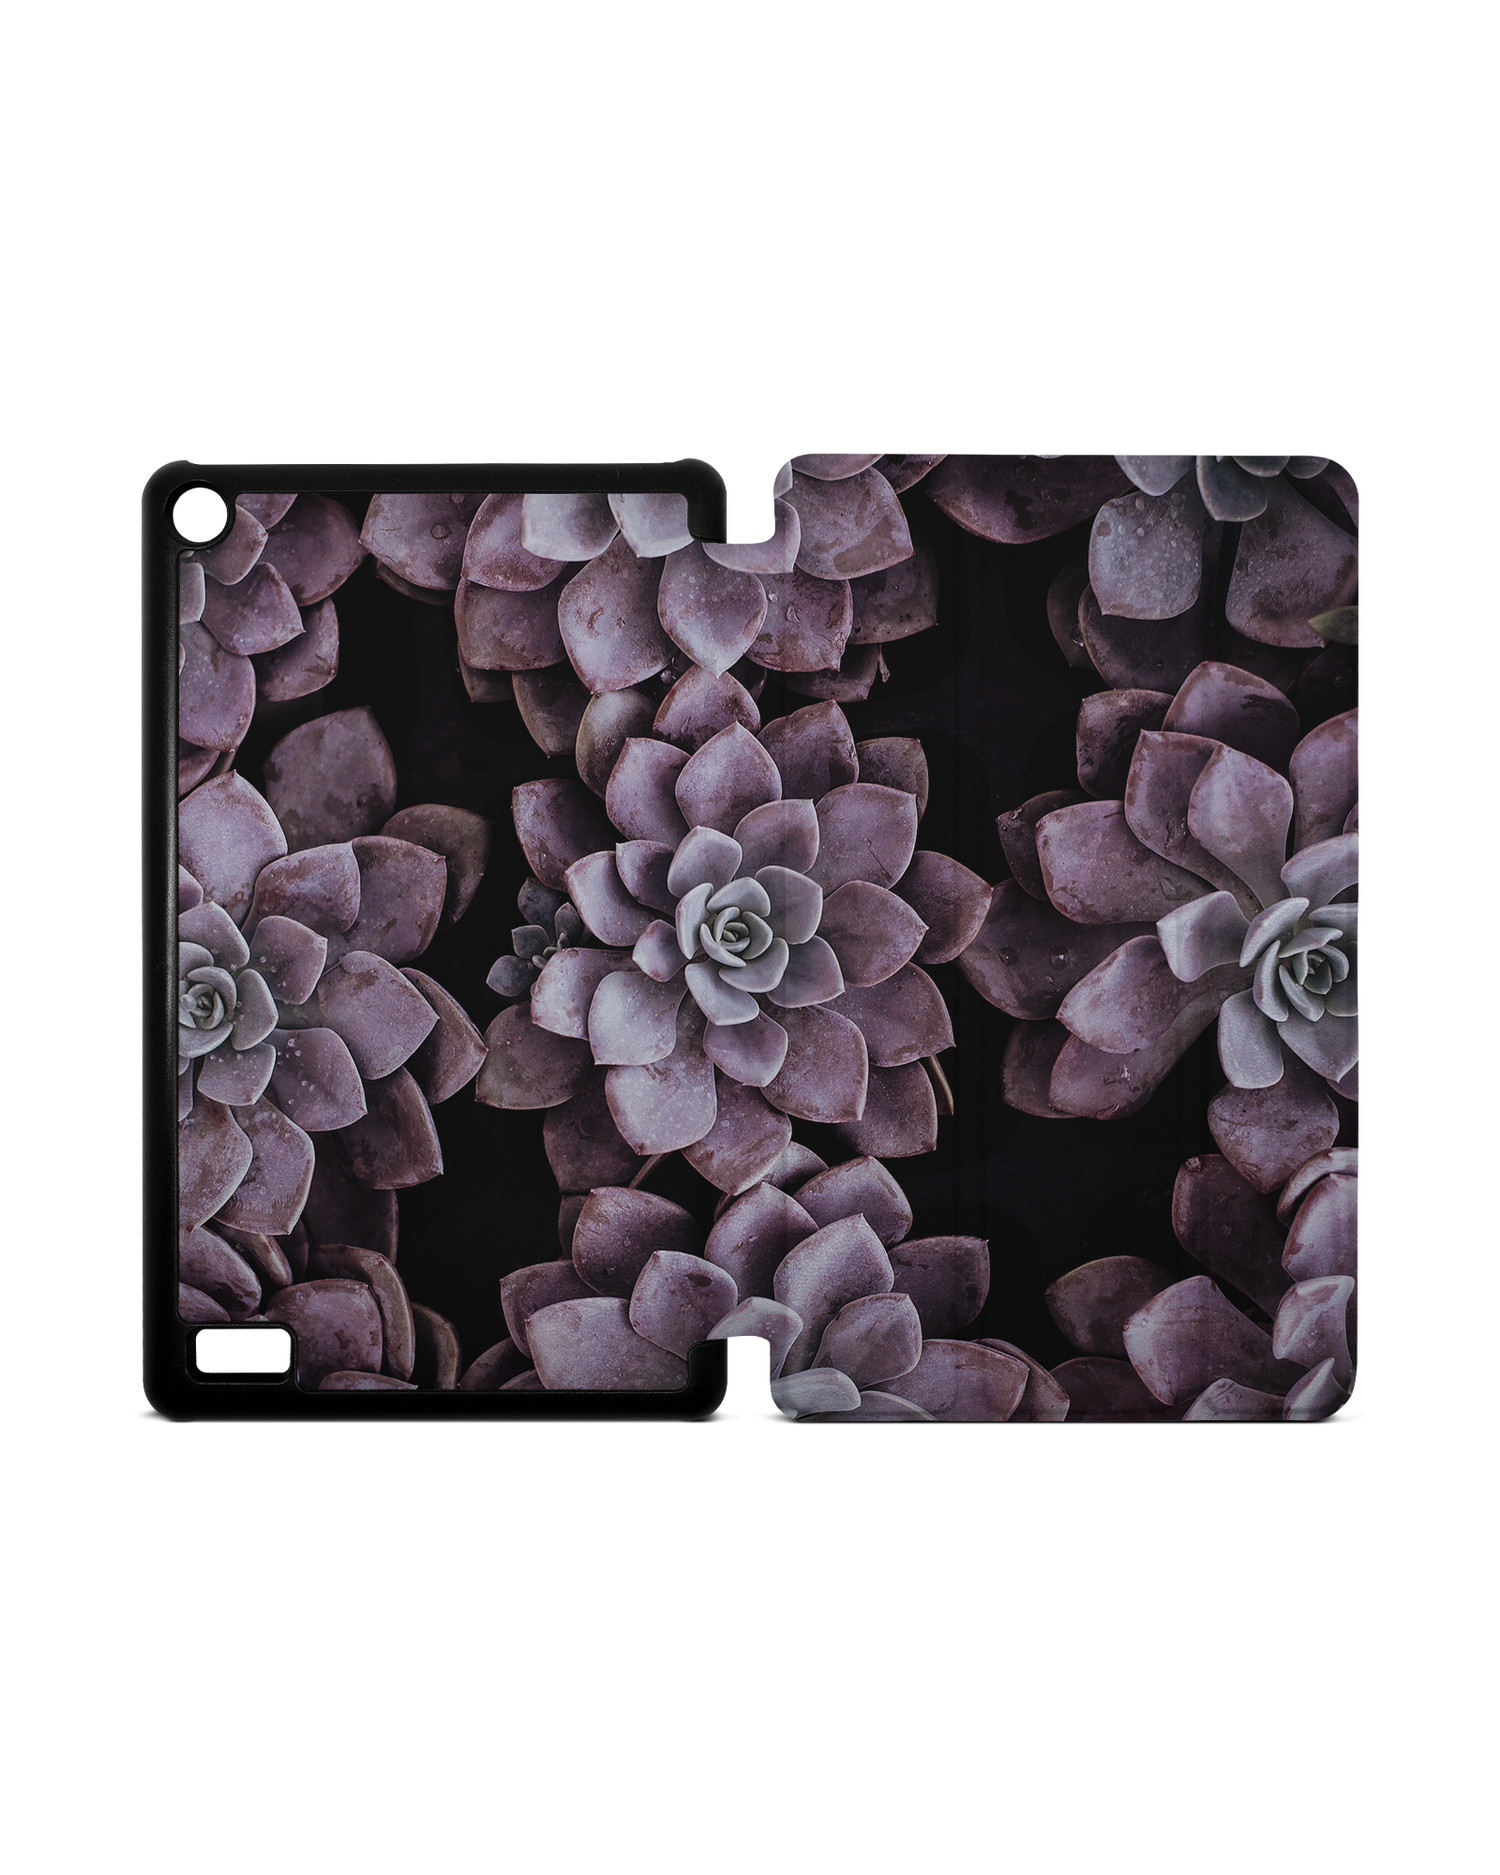 Purple Succulents Tablet Smart Case for Amazon Fire 7: Opened